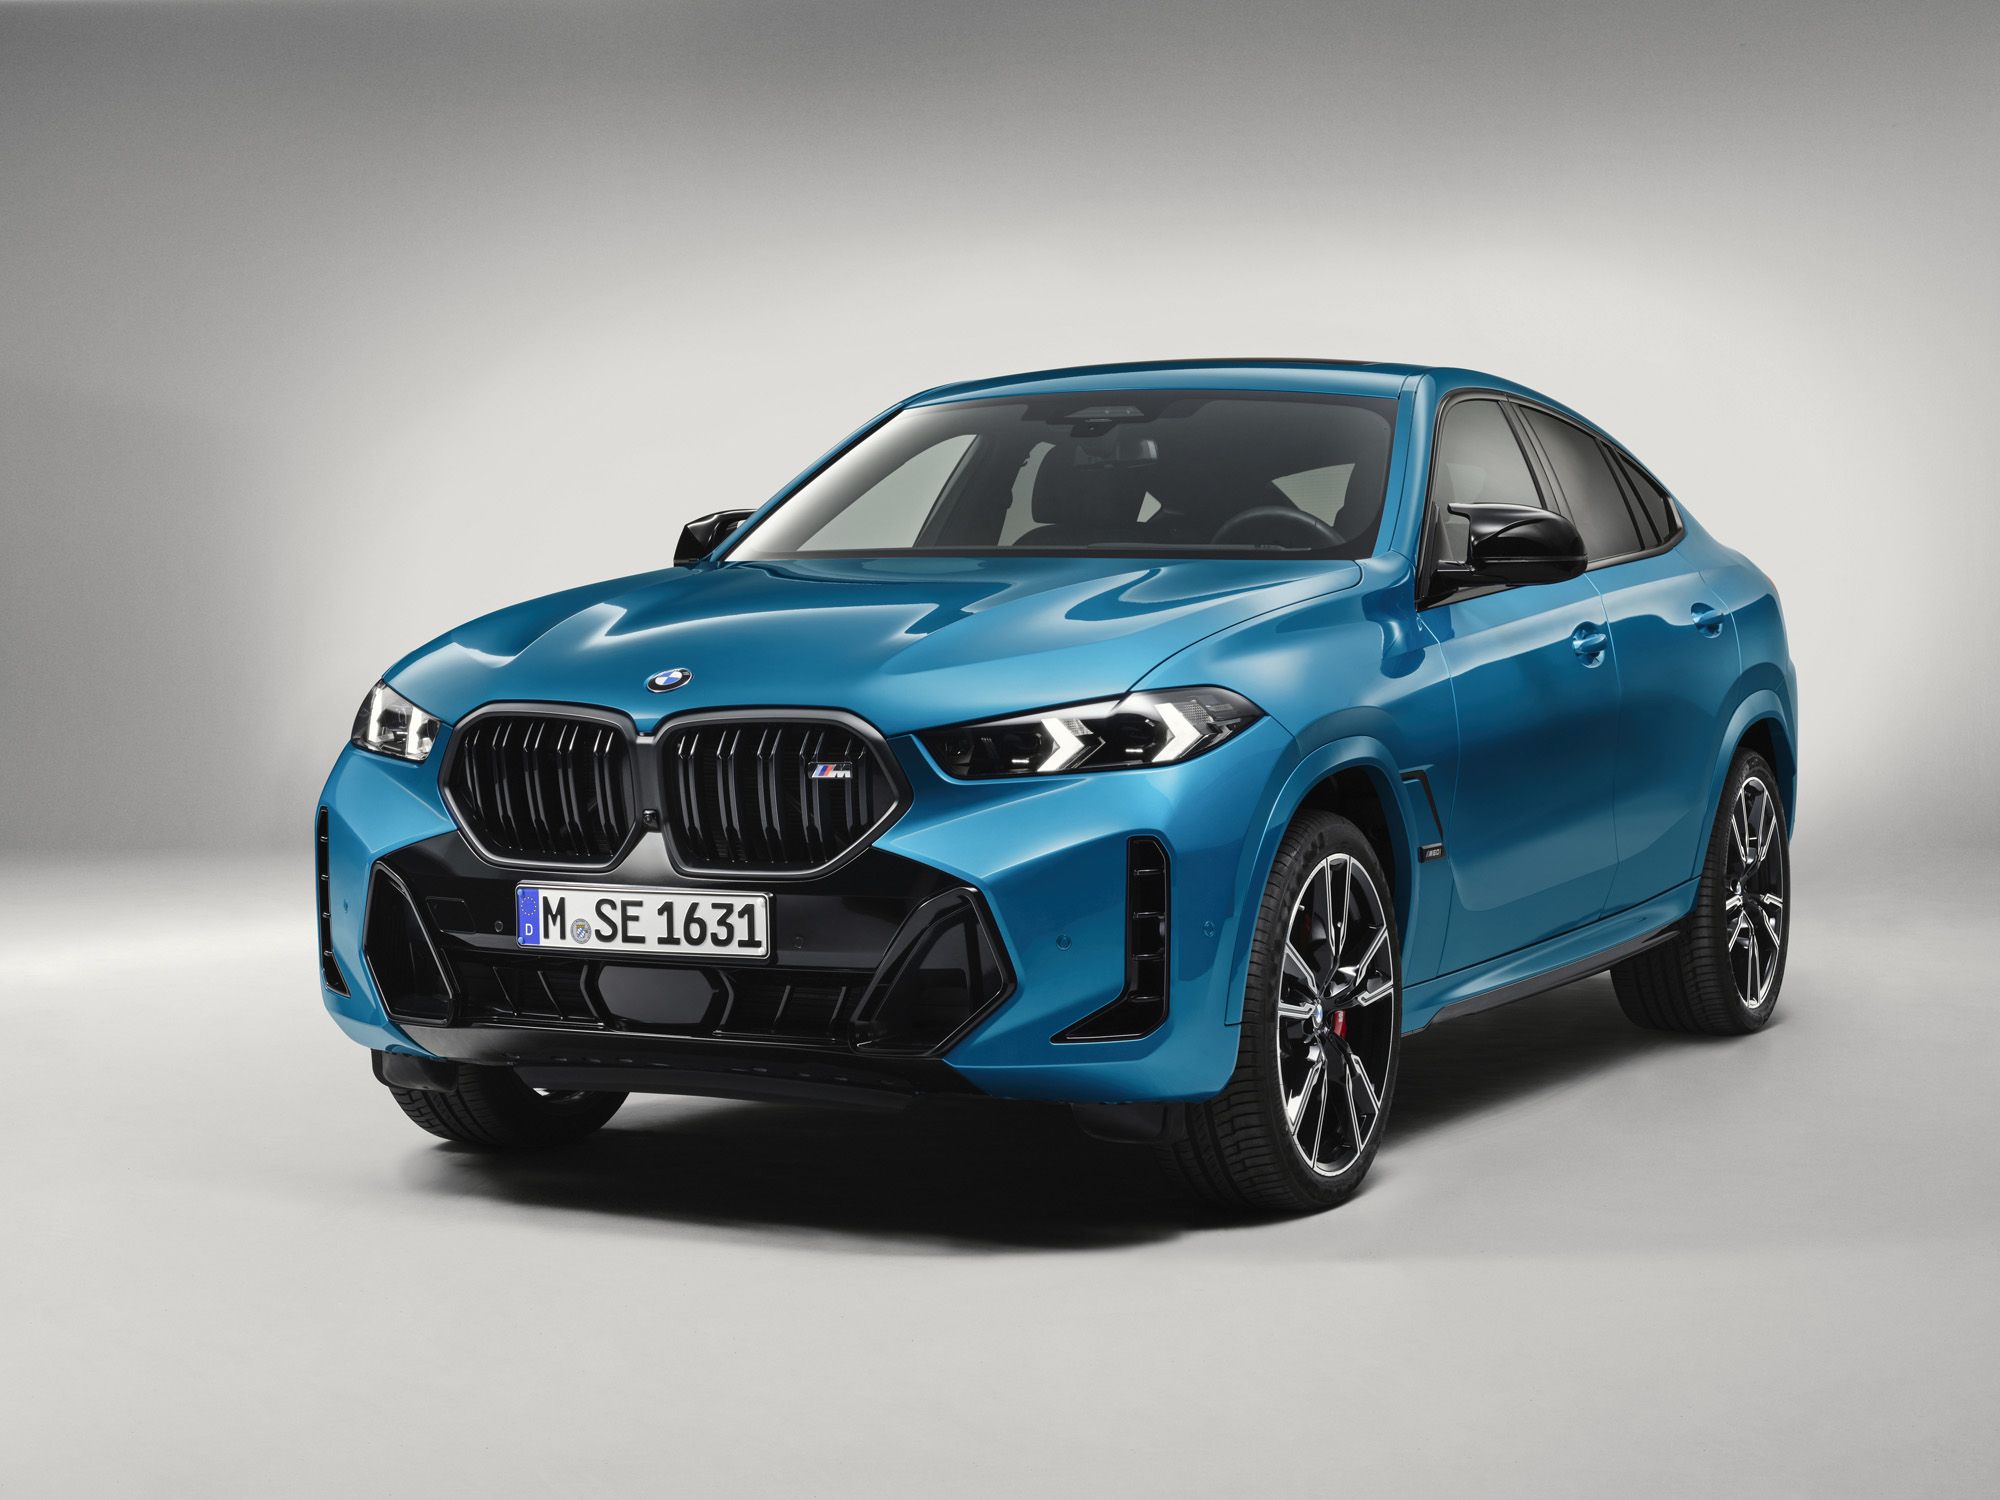 BMW X5 price, facelift details, new BMW X6 and more